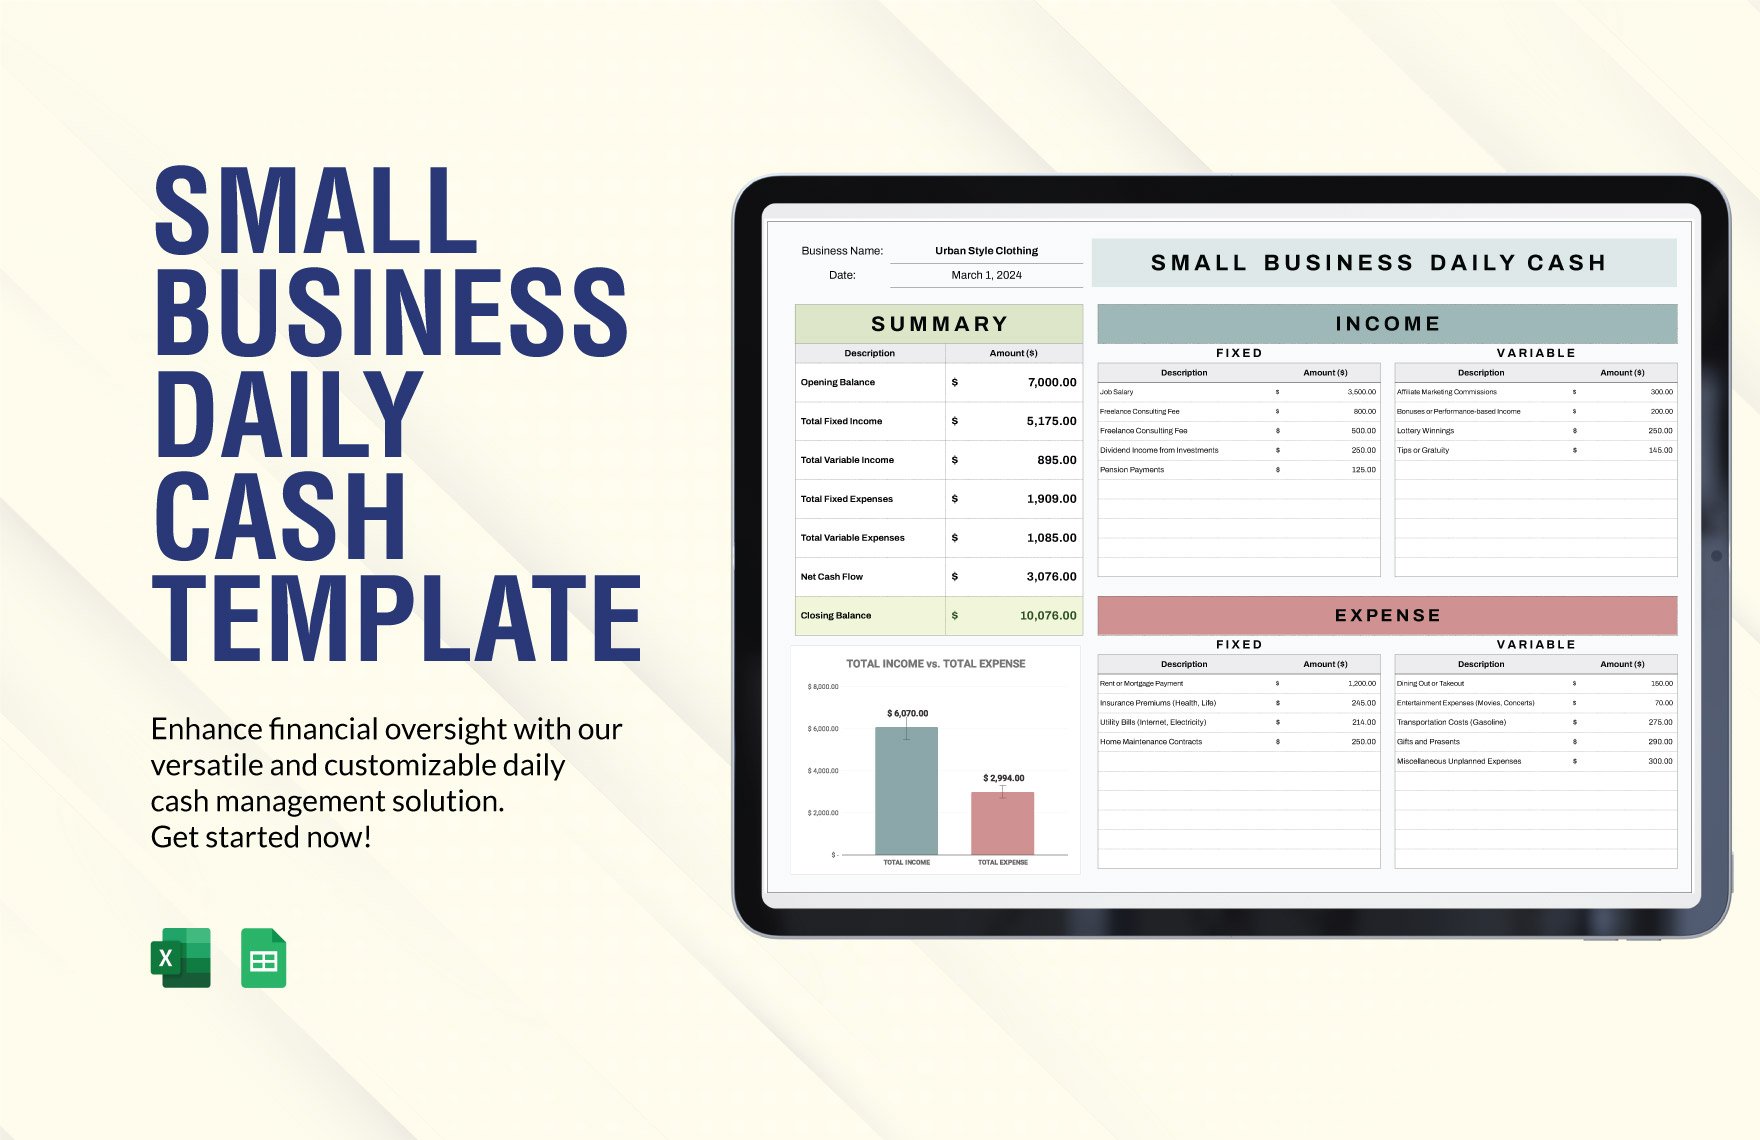 Small Business Daily Cash Template in Excel, Google Sheets